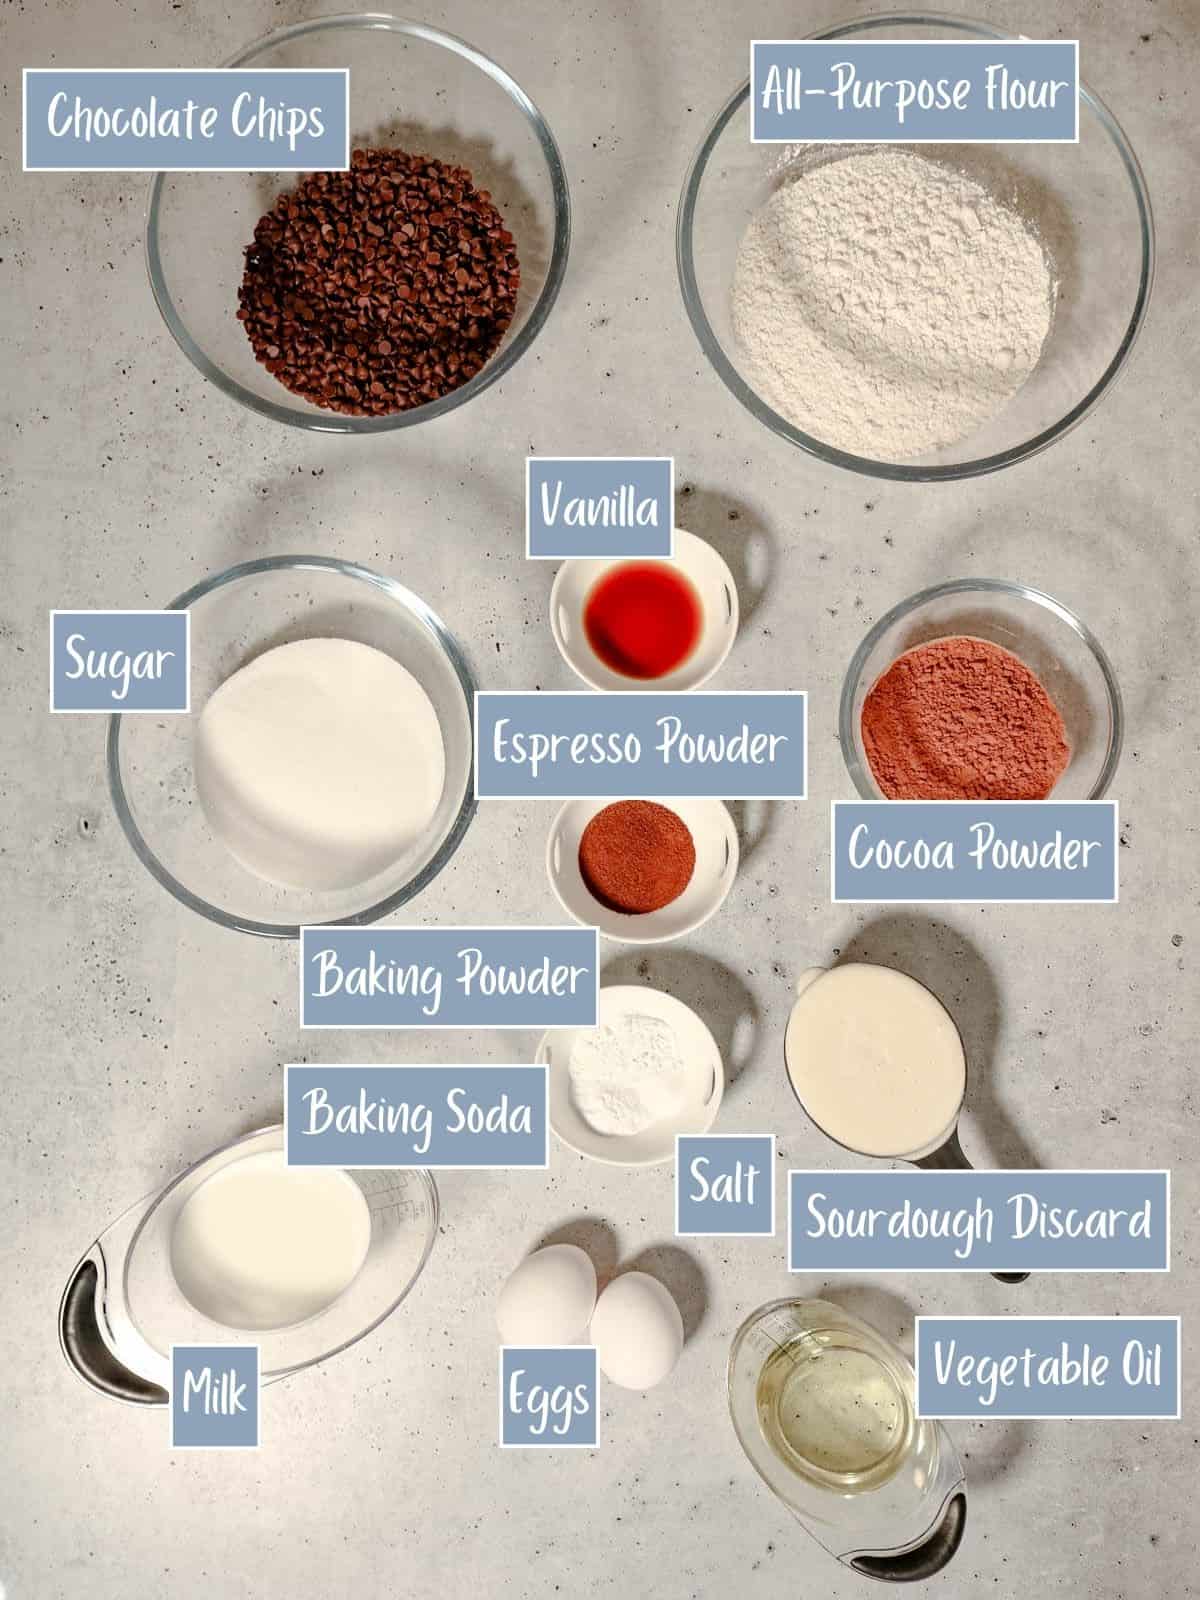 Labeled ingredients for sourdough chocolate muffins.